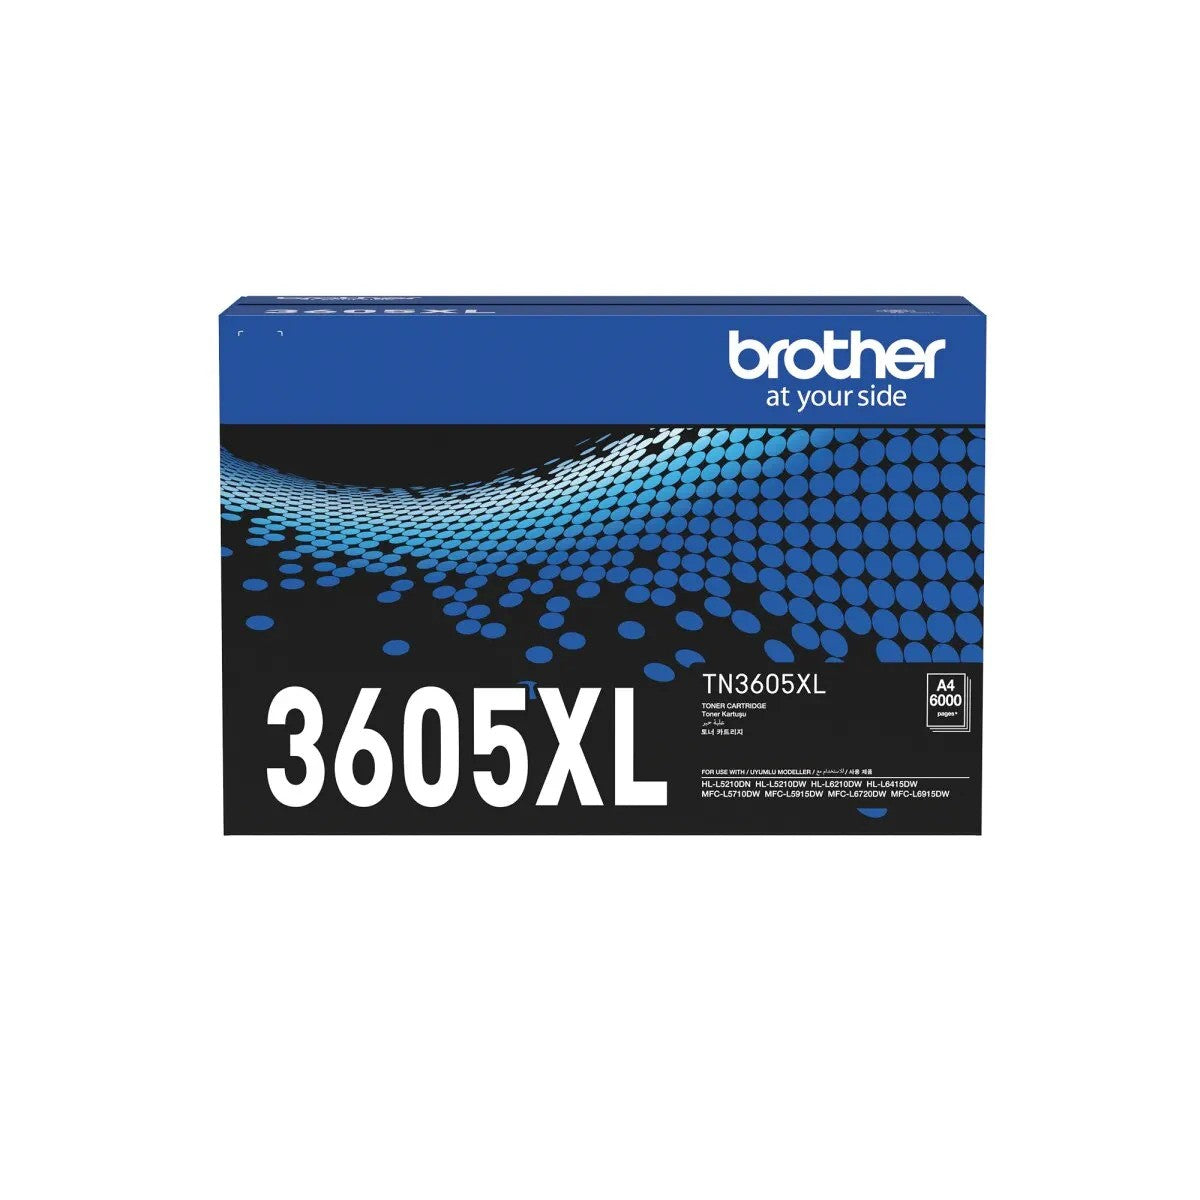 BROTHER TN-3605 TONER CARTRIDGE - Yield 6,000 Pages